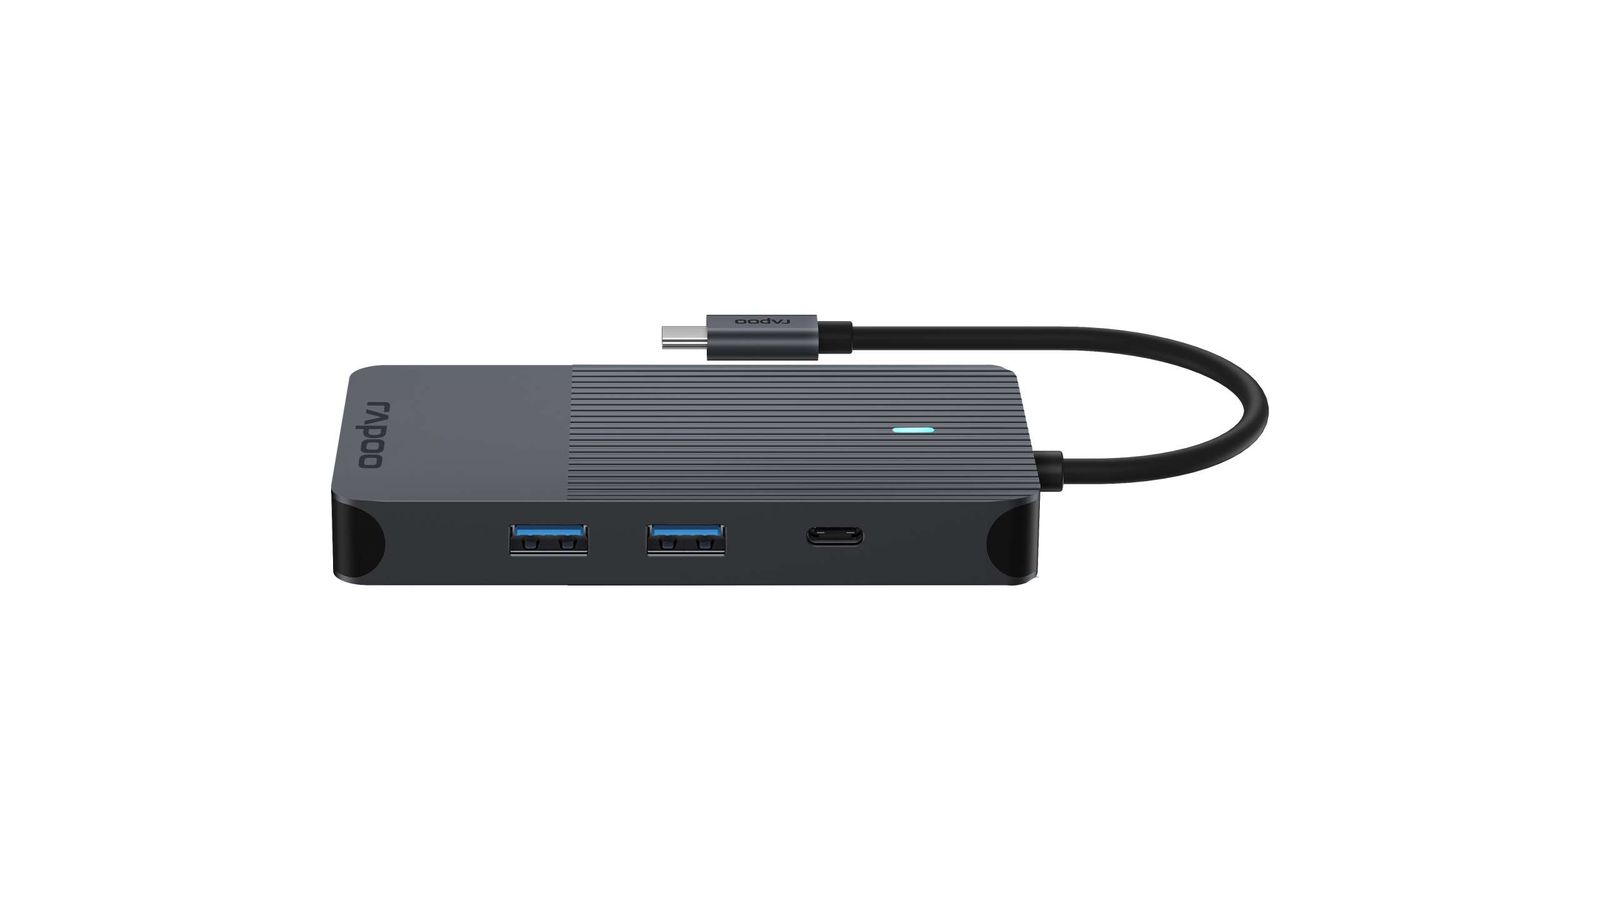 Rapoo UCM-2004 8-in-1 USB-C Multiport Adapter 100W Power Delivery HDMI LAN USB-C USB-A 3.0 microSD v1.0